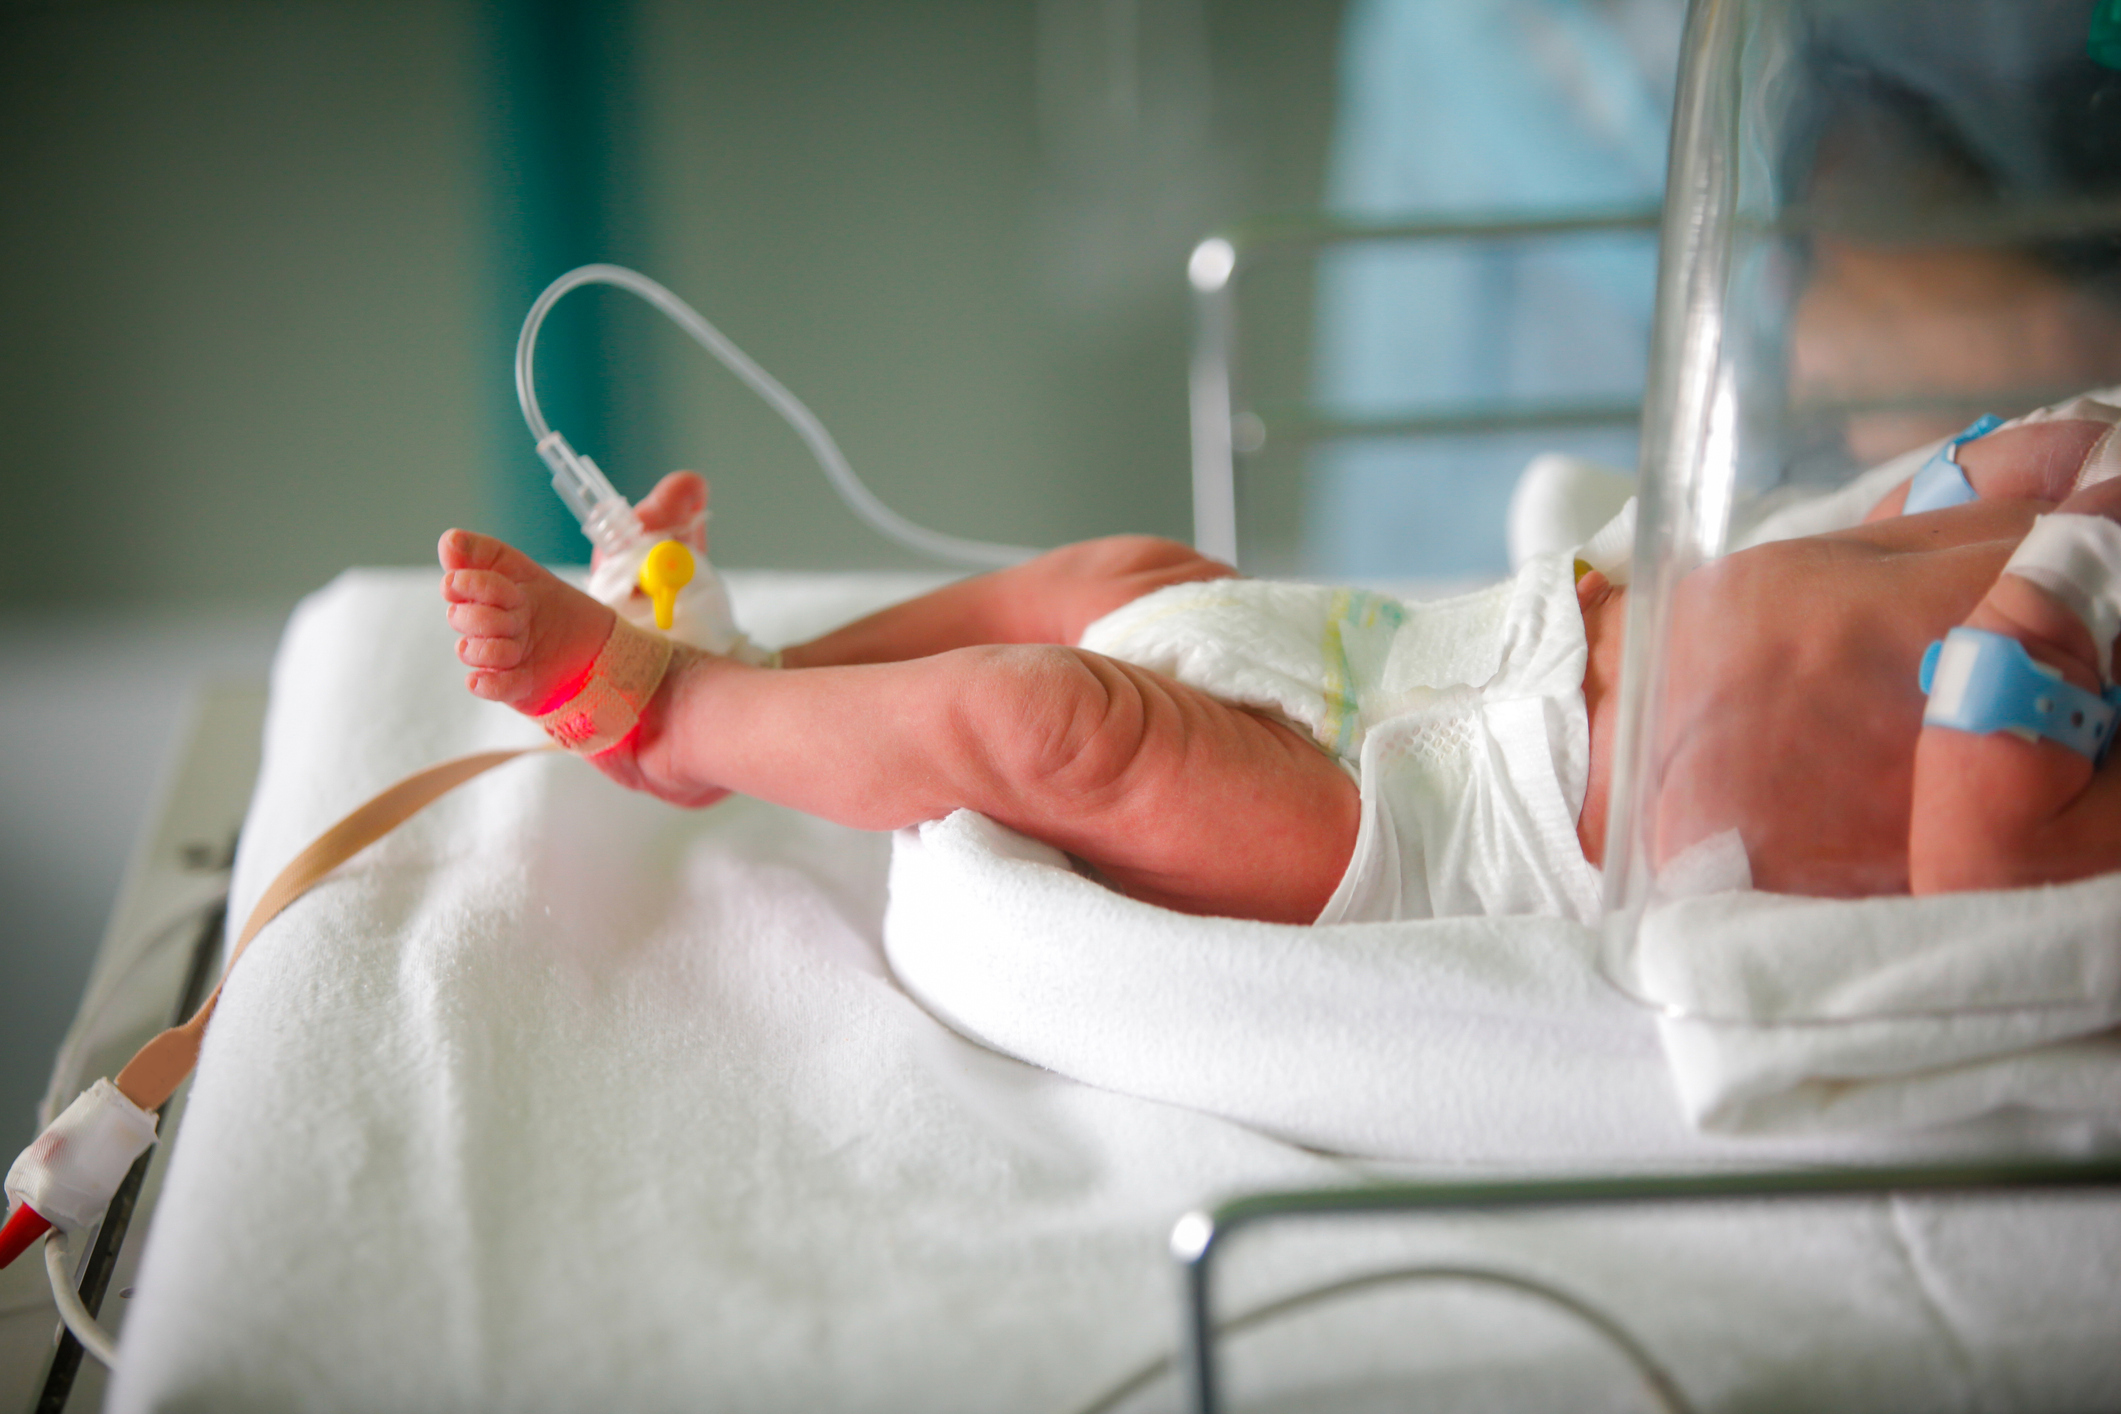 An infant in the hospital